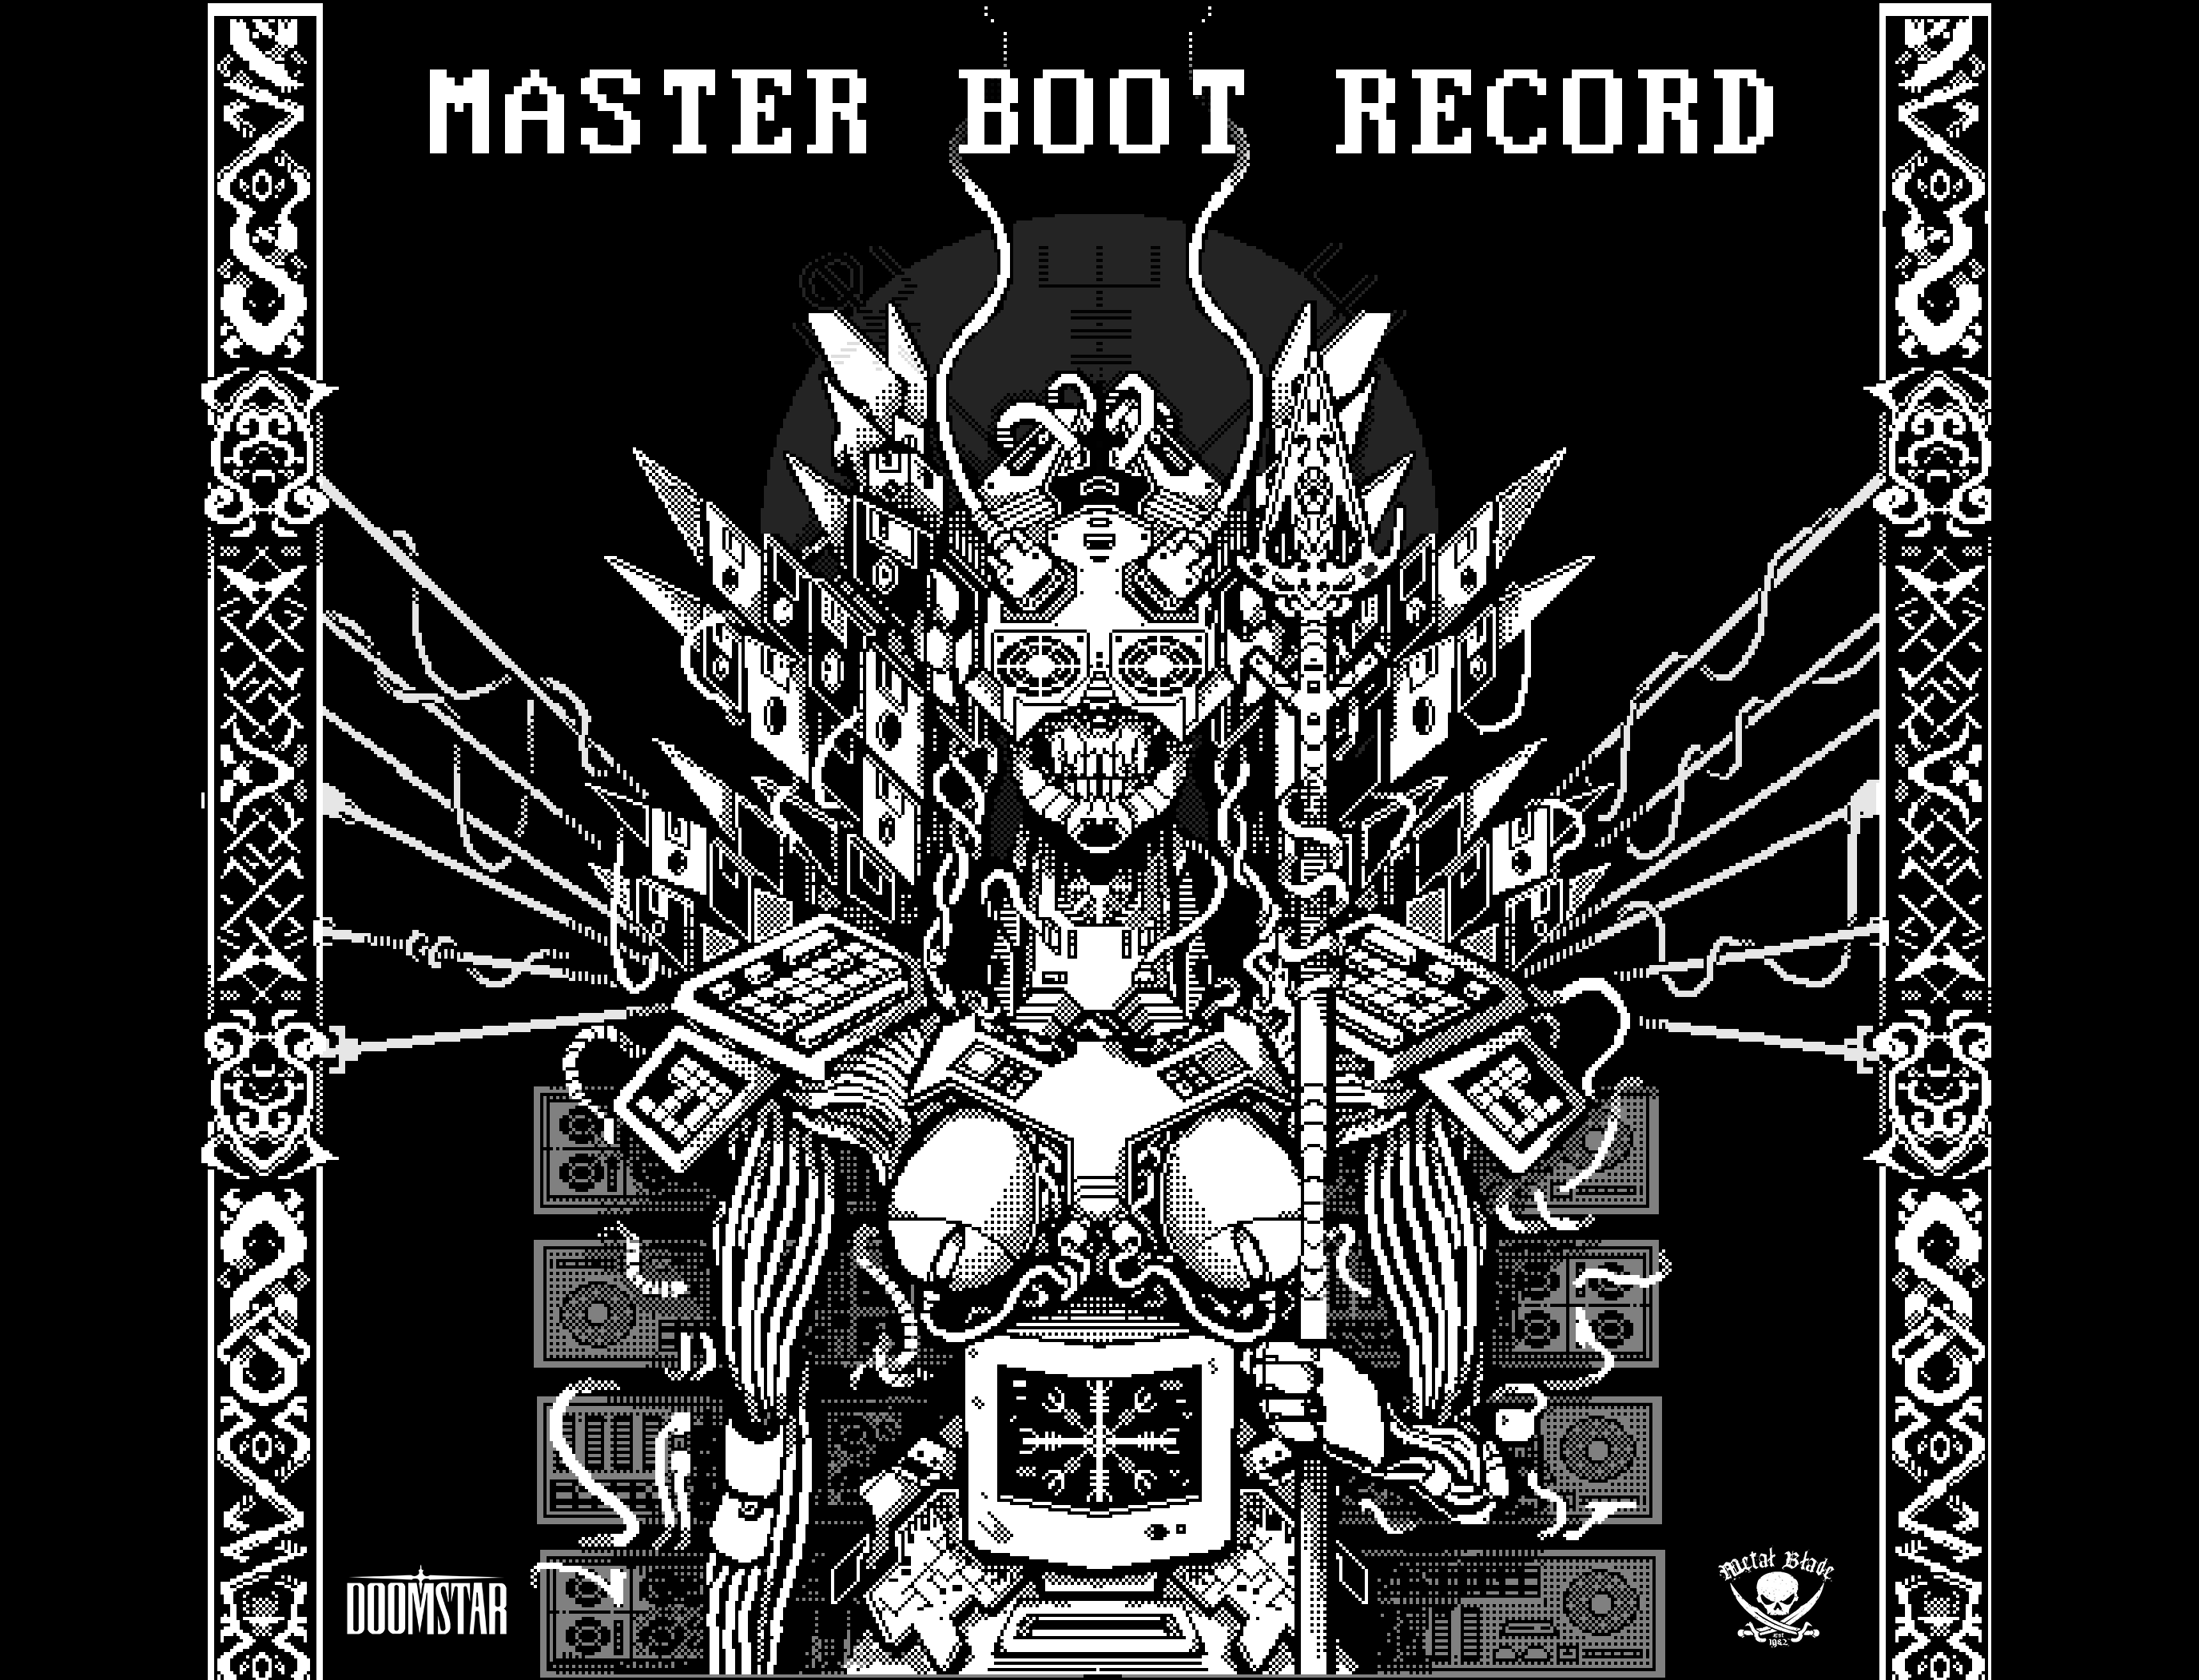 Master Boot Record, Dawn Division, the Children's Crusade